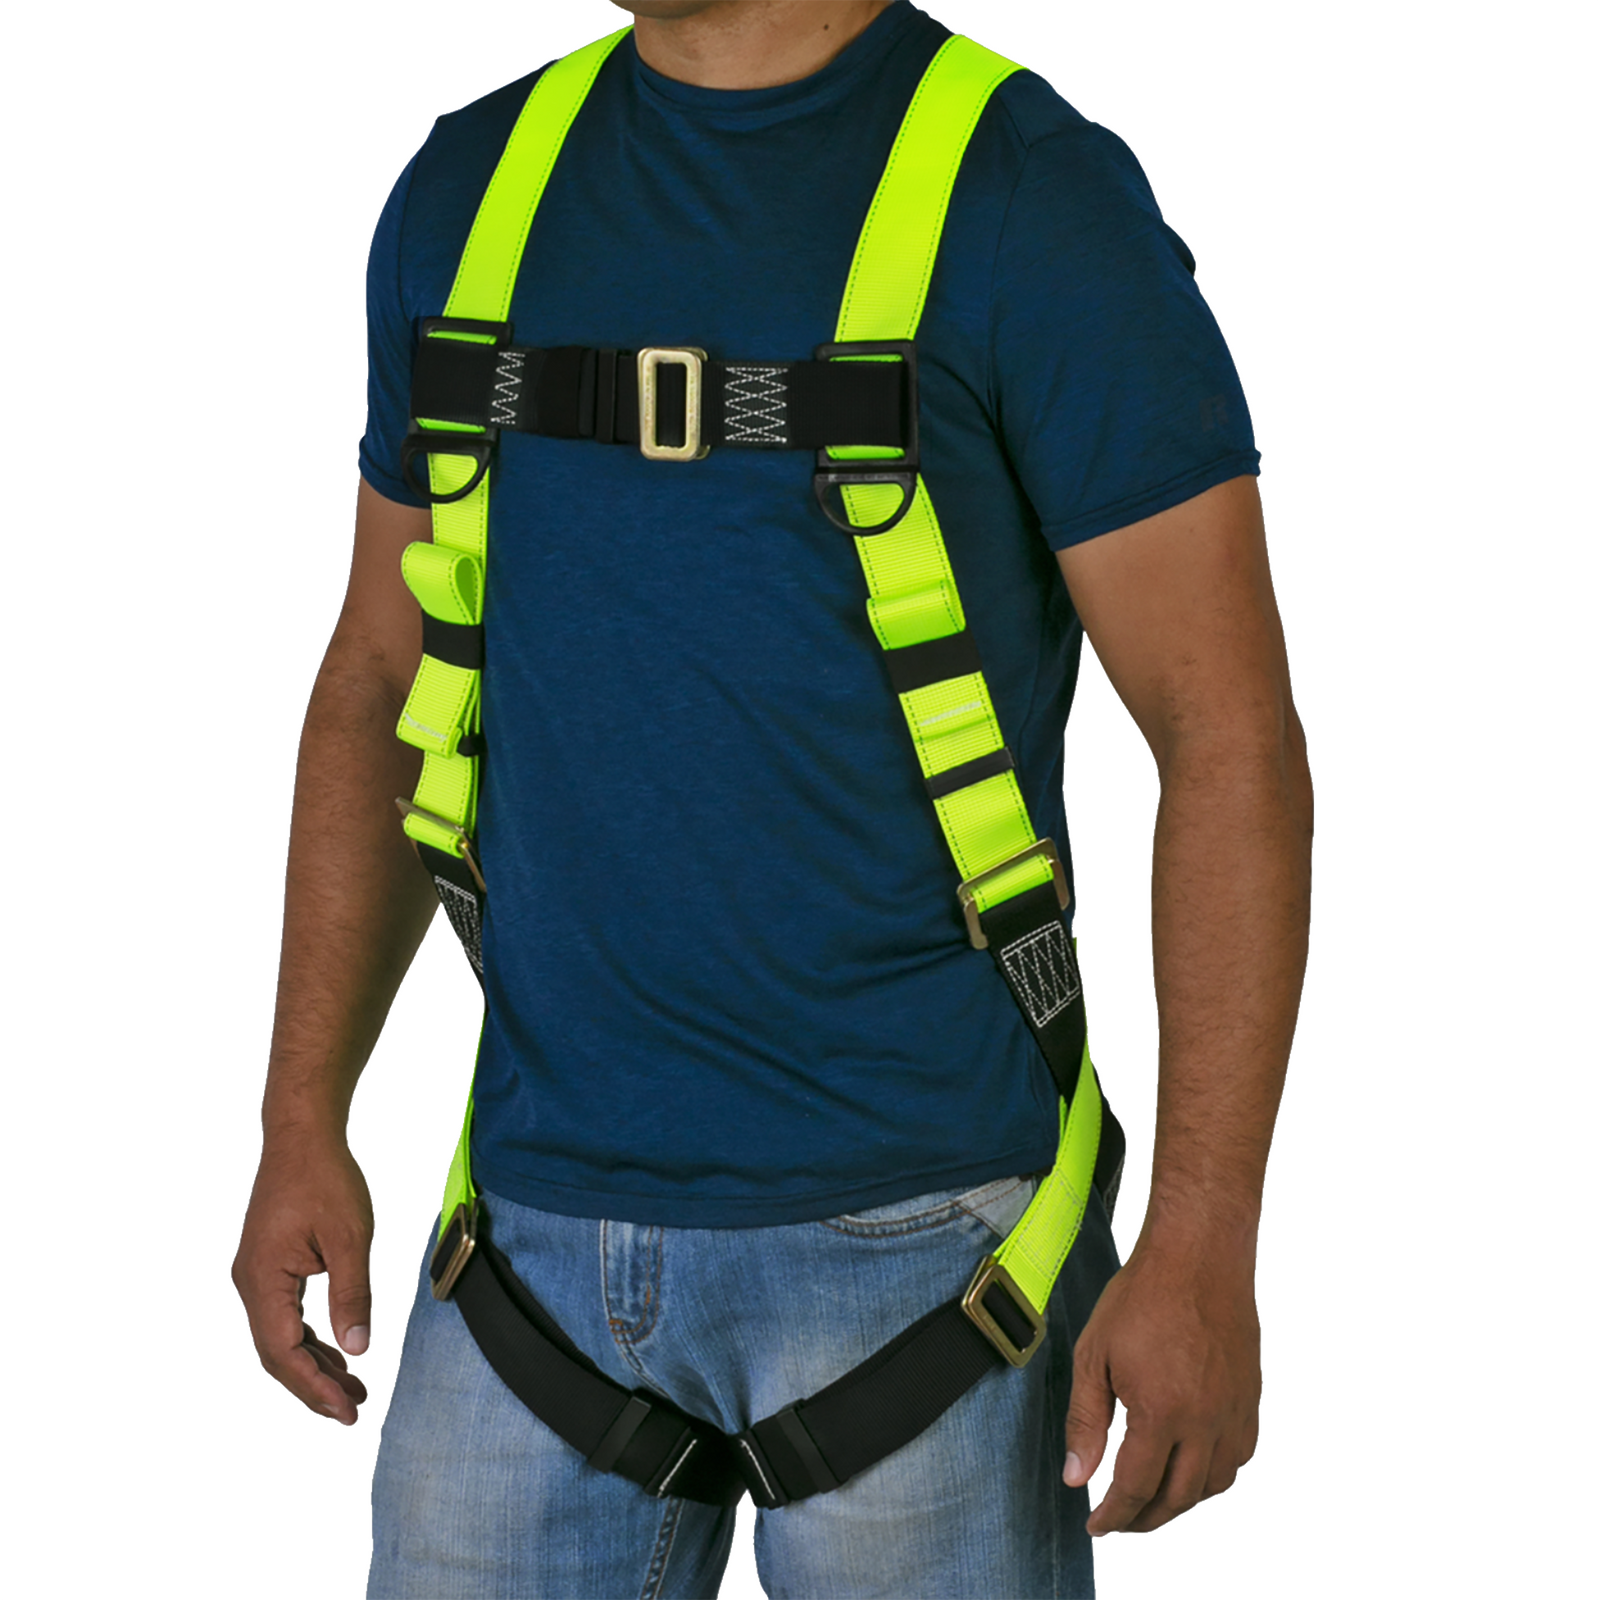 Front view of the torso of a person wearing the hi-vis yellow and black 1D fall protection safety body JORESTECH harness